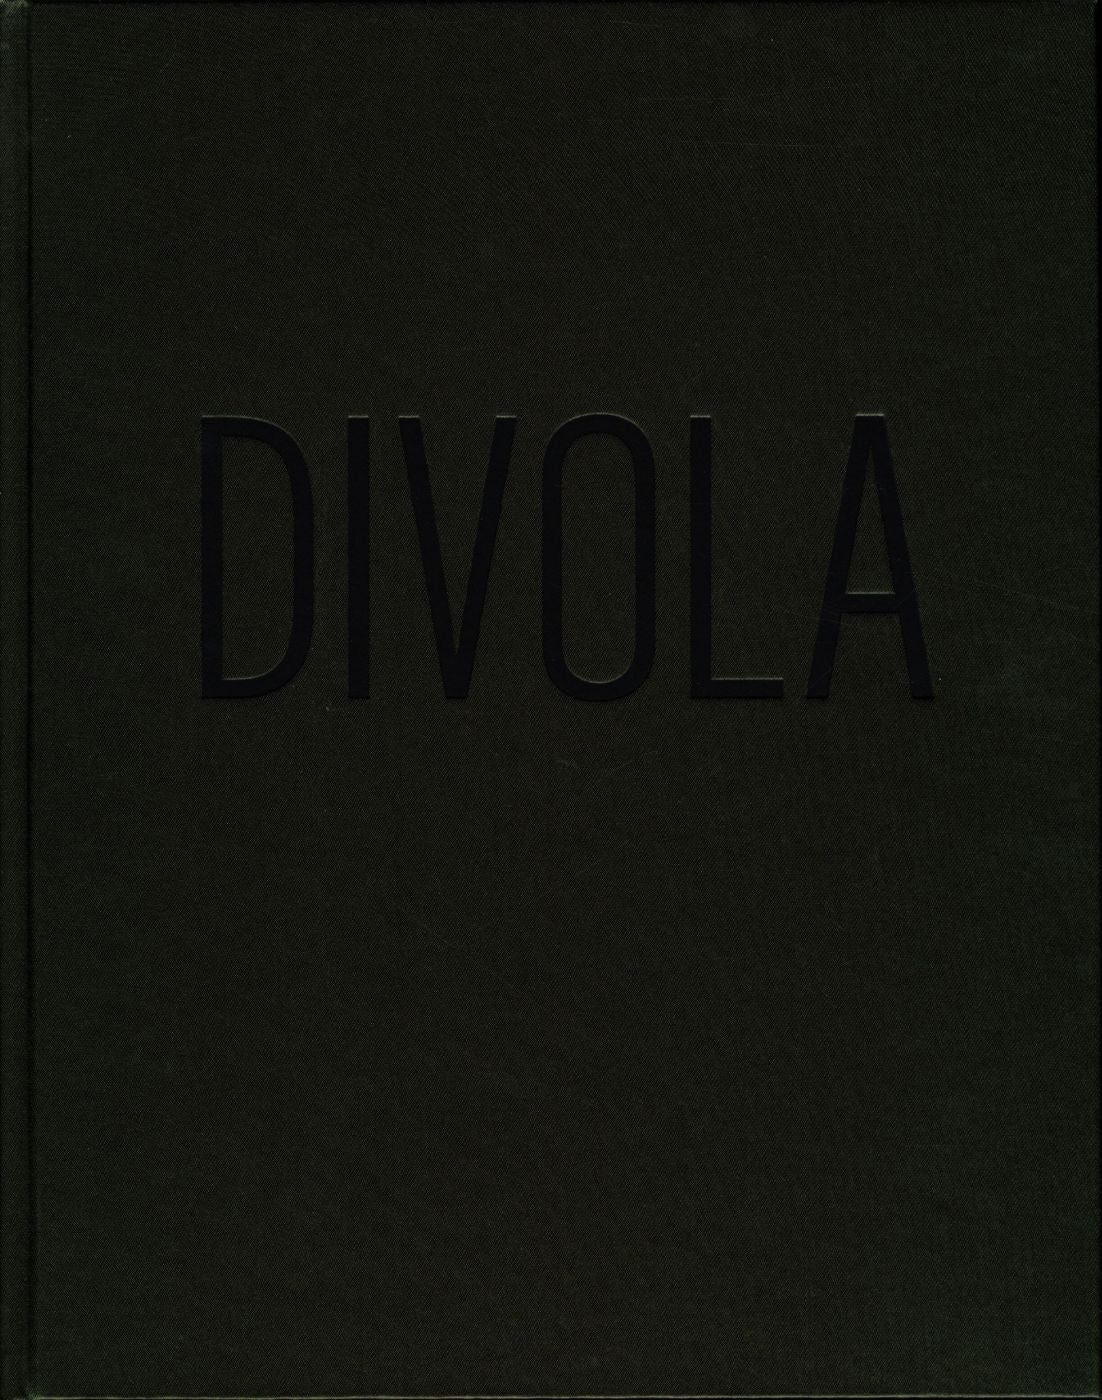 NZ Library #1: John Divola: San Fernando Valley, Limited Edition (NZ Library - Set One, Volume Two) [SIGNED]